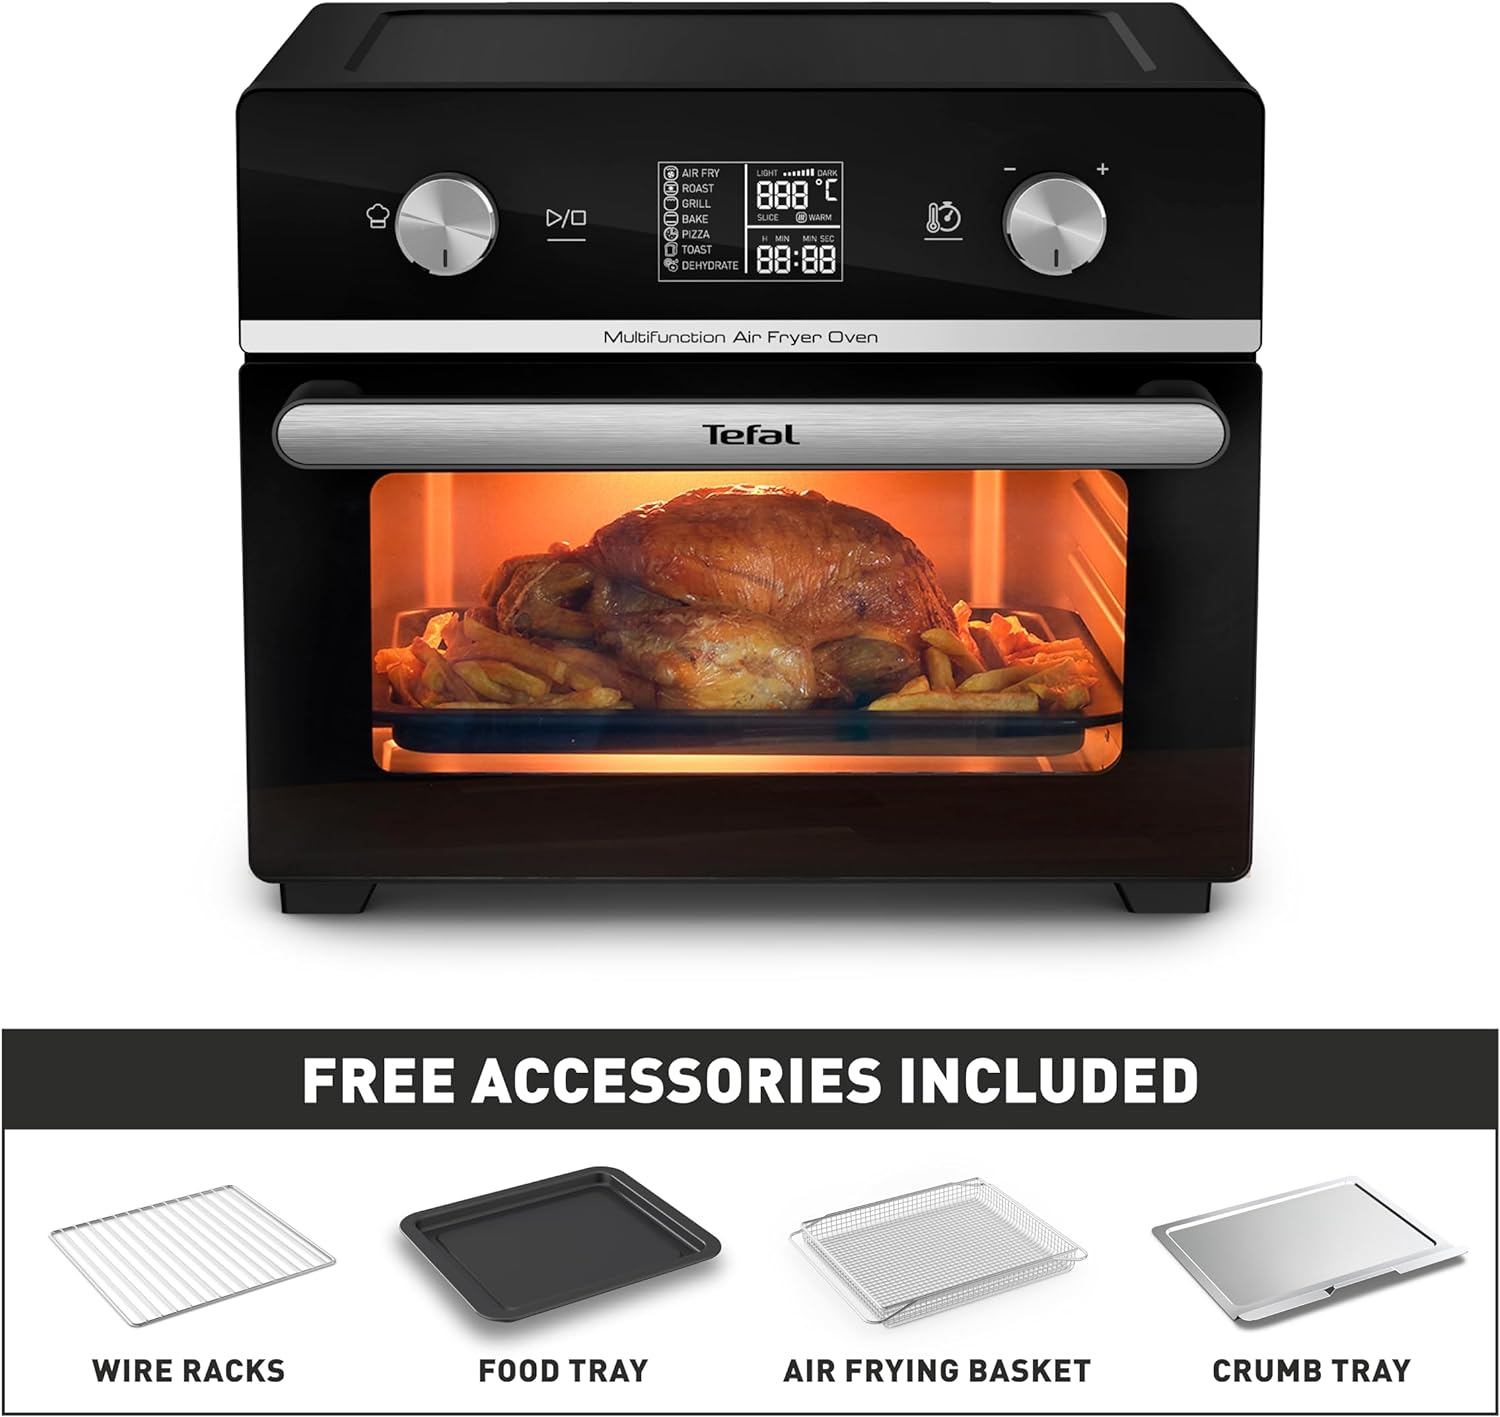 Tefal Easy Fry Air Fryer Oven, 20L Capacity 10in1 Functions, Air Fry, Roast, Pizza, Bake, Grill, Toast, Dehydrate, Monitor - Free Cooking, Healthy, Delicious, Crispy, Easy to Use, Black, FW605840 - Amazing Gadgets Outlet